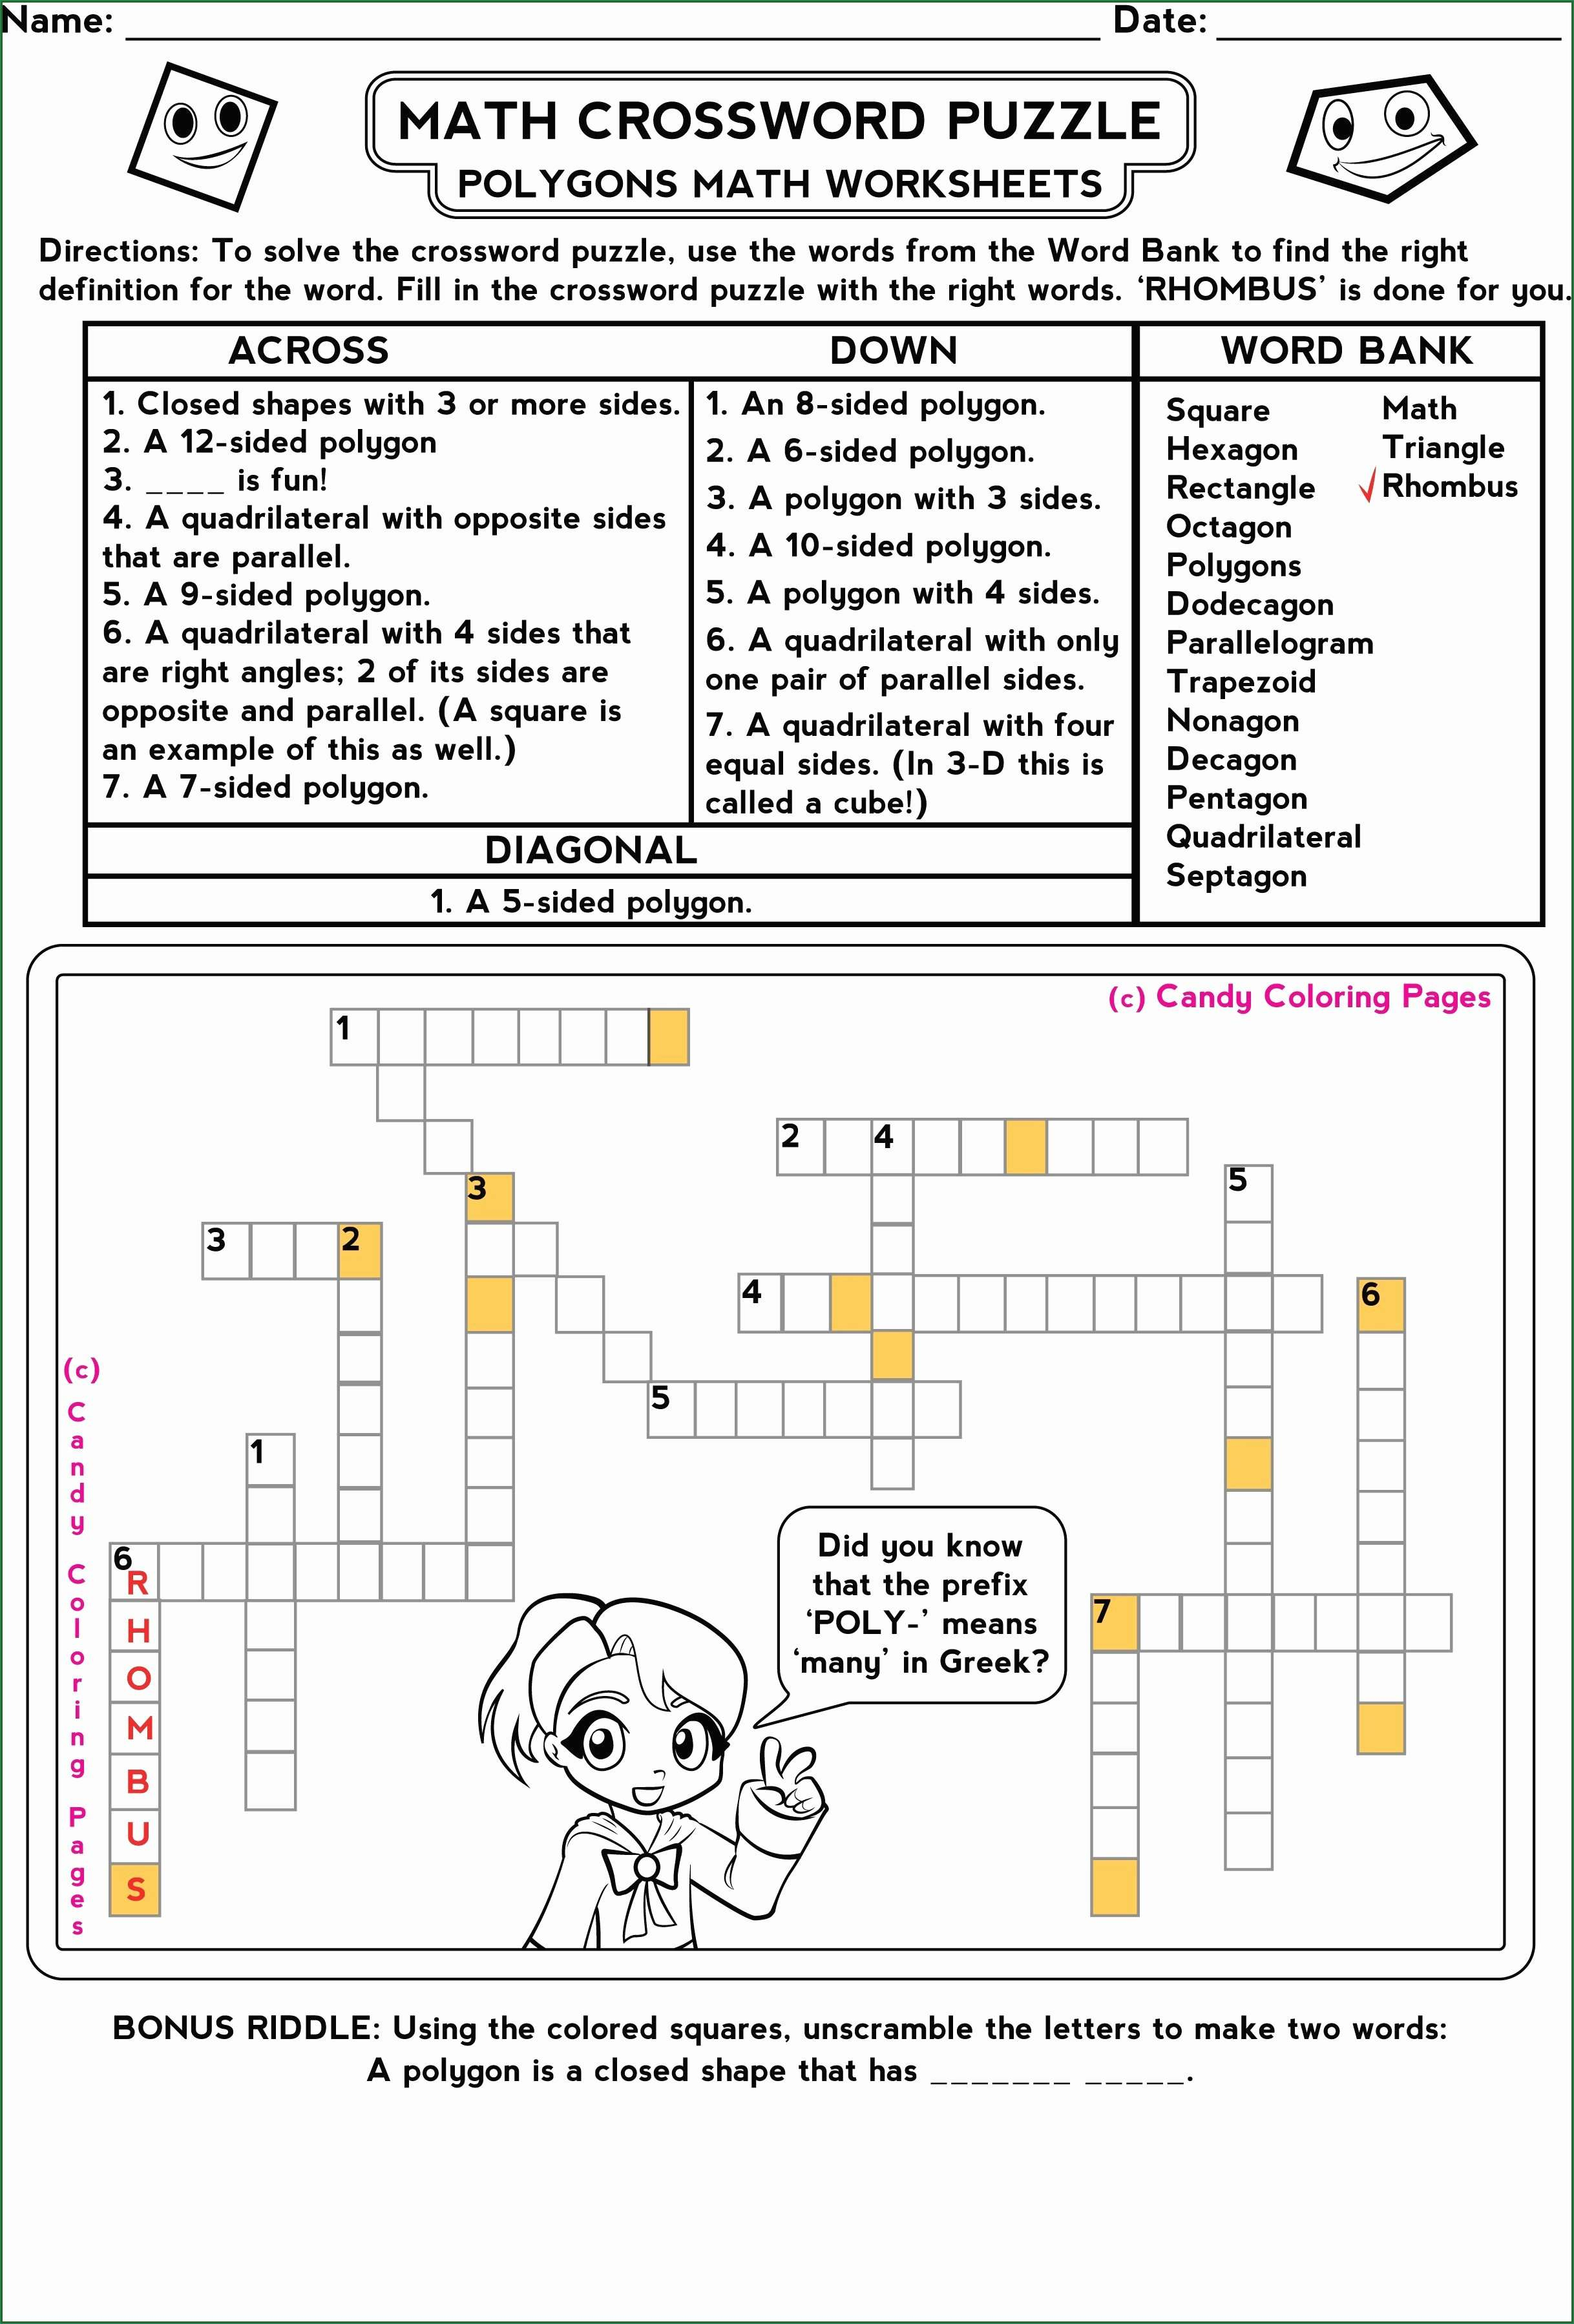 Crossword Puzzle Template - Yapis.sticken.co - Free Printable Accounting Crossword Puzzles